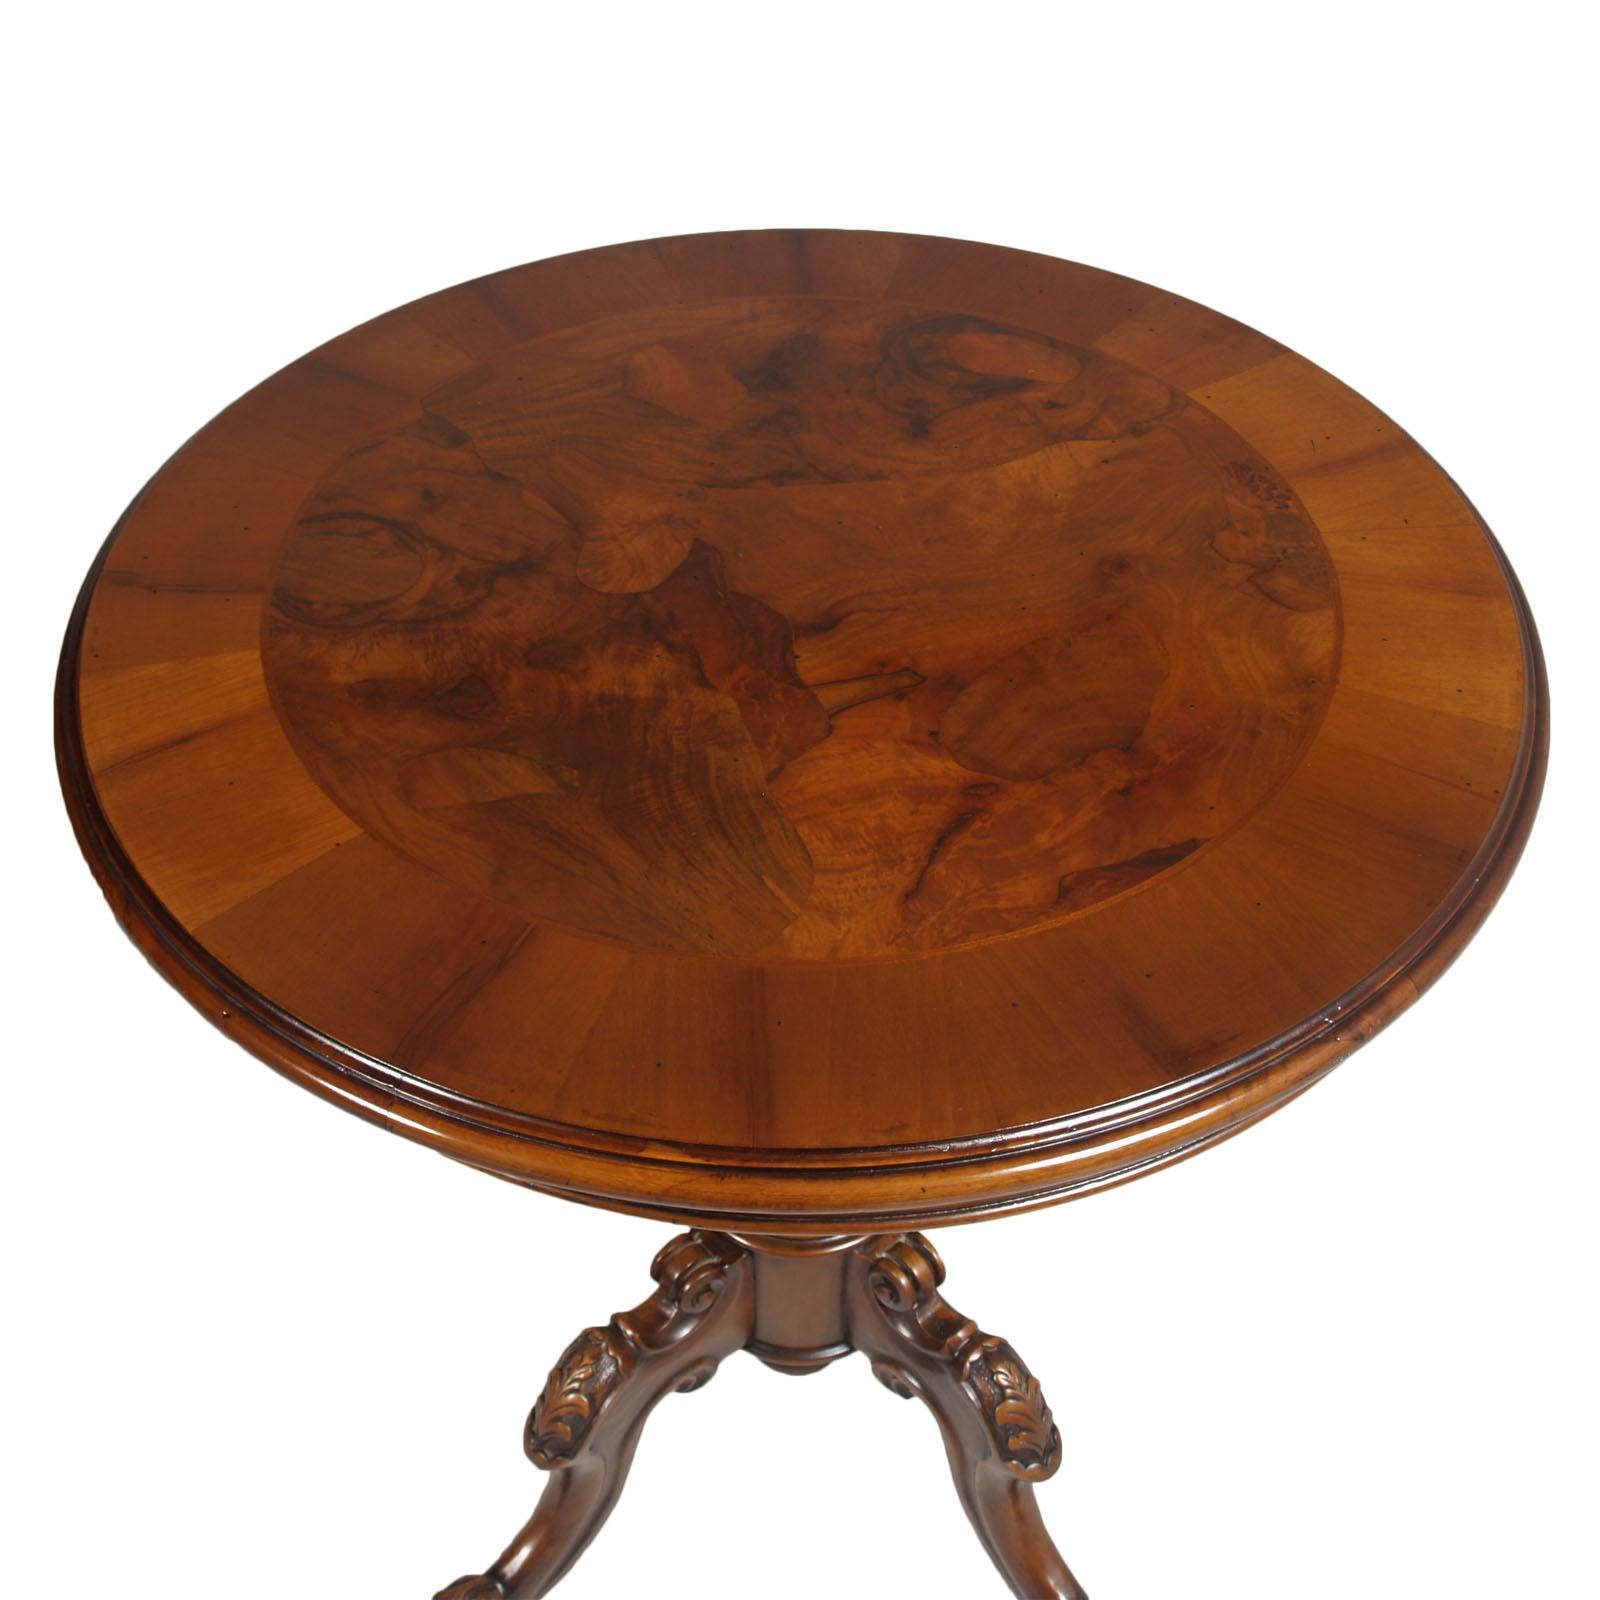 Early 20th century Venetian Gueridon , side table with four-legged legging hand-carved walnut and round top in briar and walnut slab.
Wax polished in excellent condition. Testolini & Salviati attributed.

Measures cm: Height 72, diameter 70.


